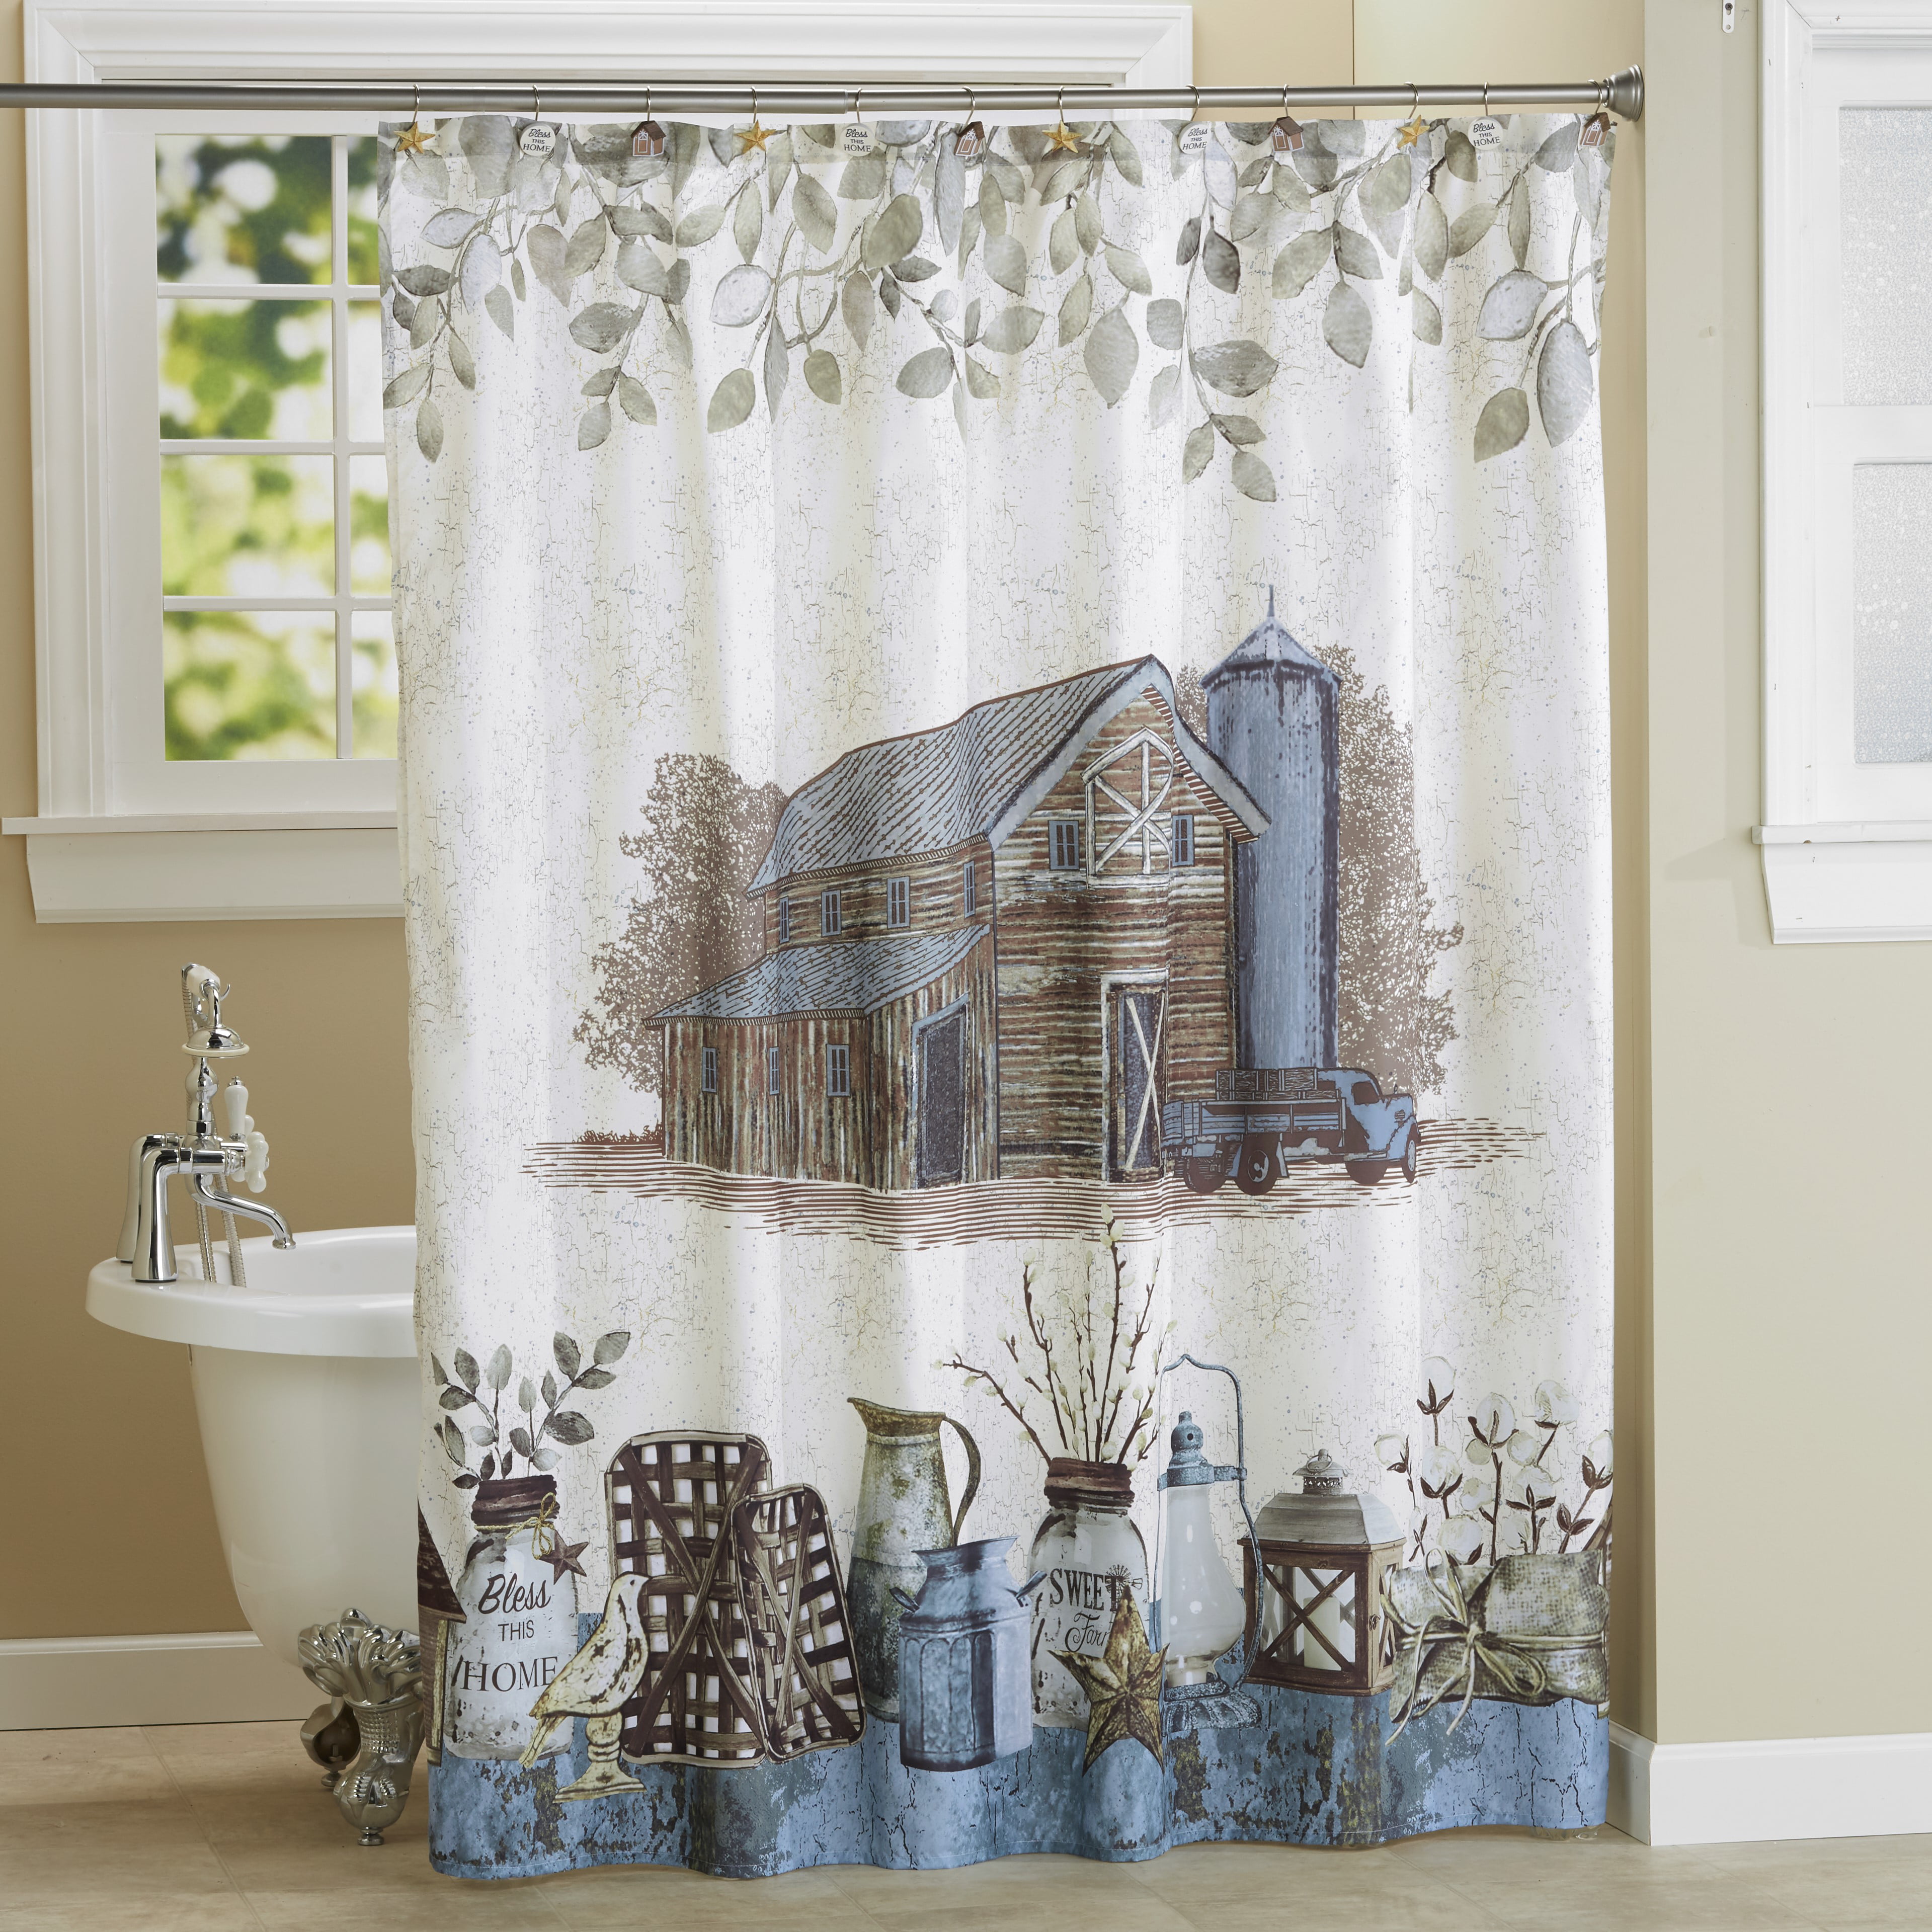 Brown Deer Fabric Shower Curtain 70x70 Rustic Country Lodge Cabin Primitive 